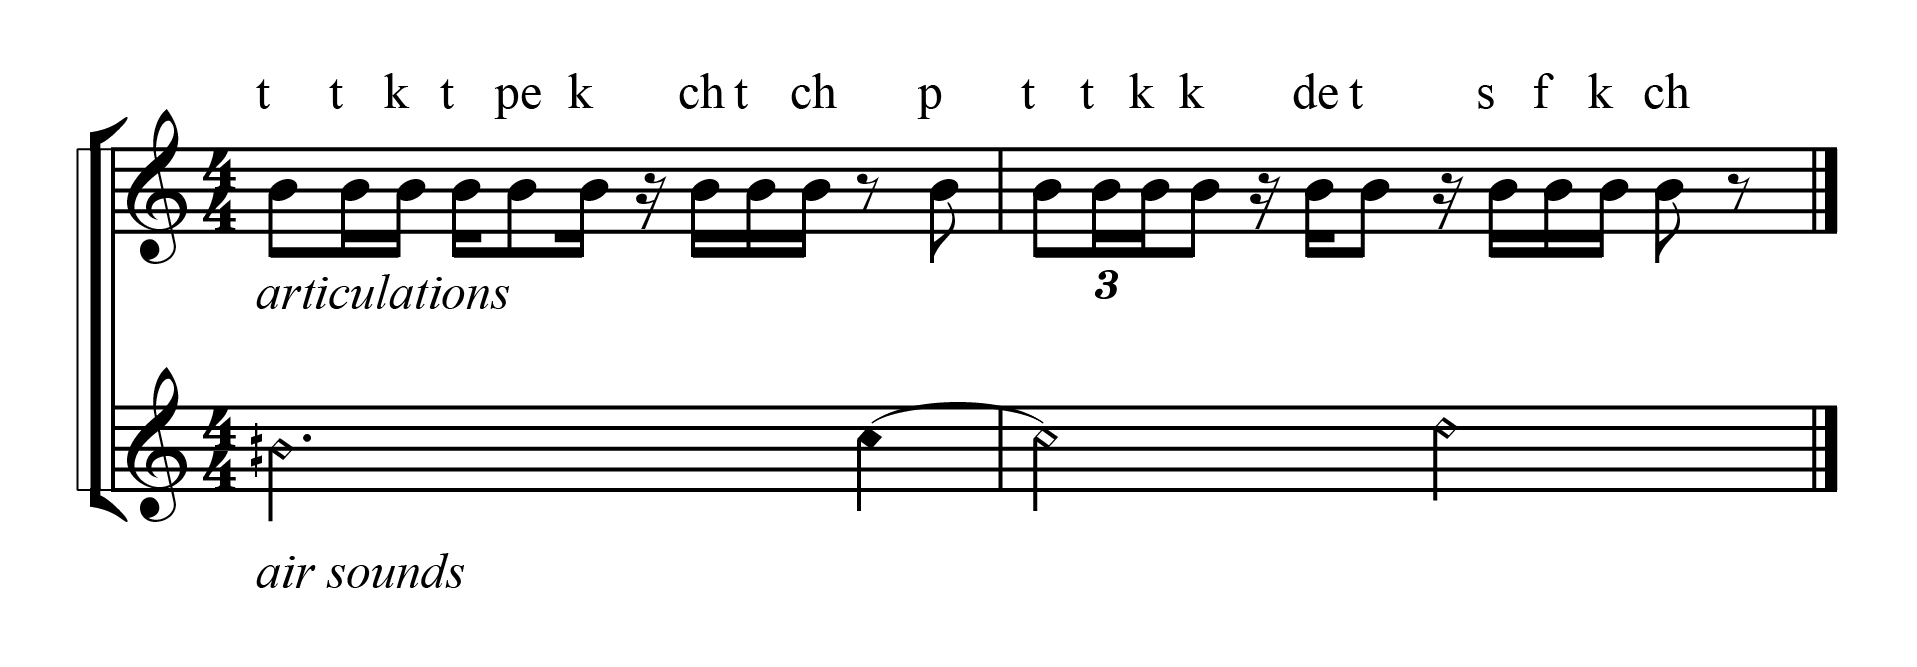 Notation of articulated air sounds